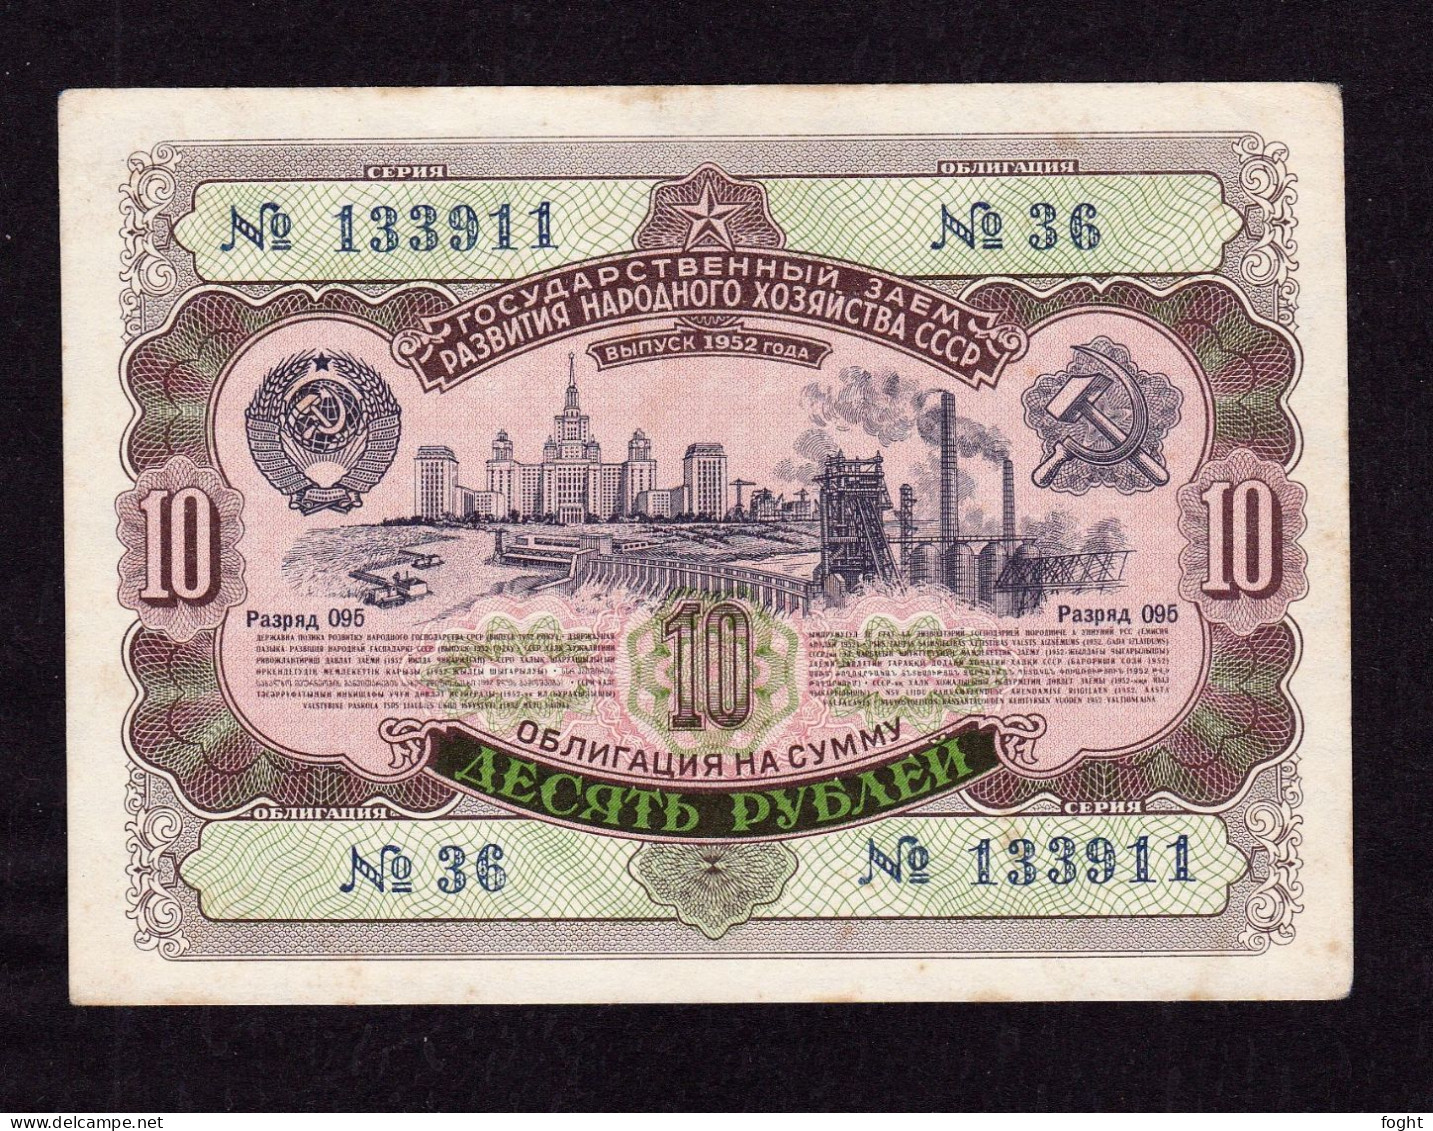 1952 Russia 10 Roubles State Loan Bond - Russia